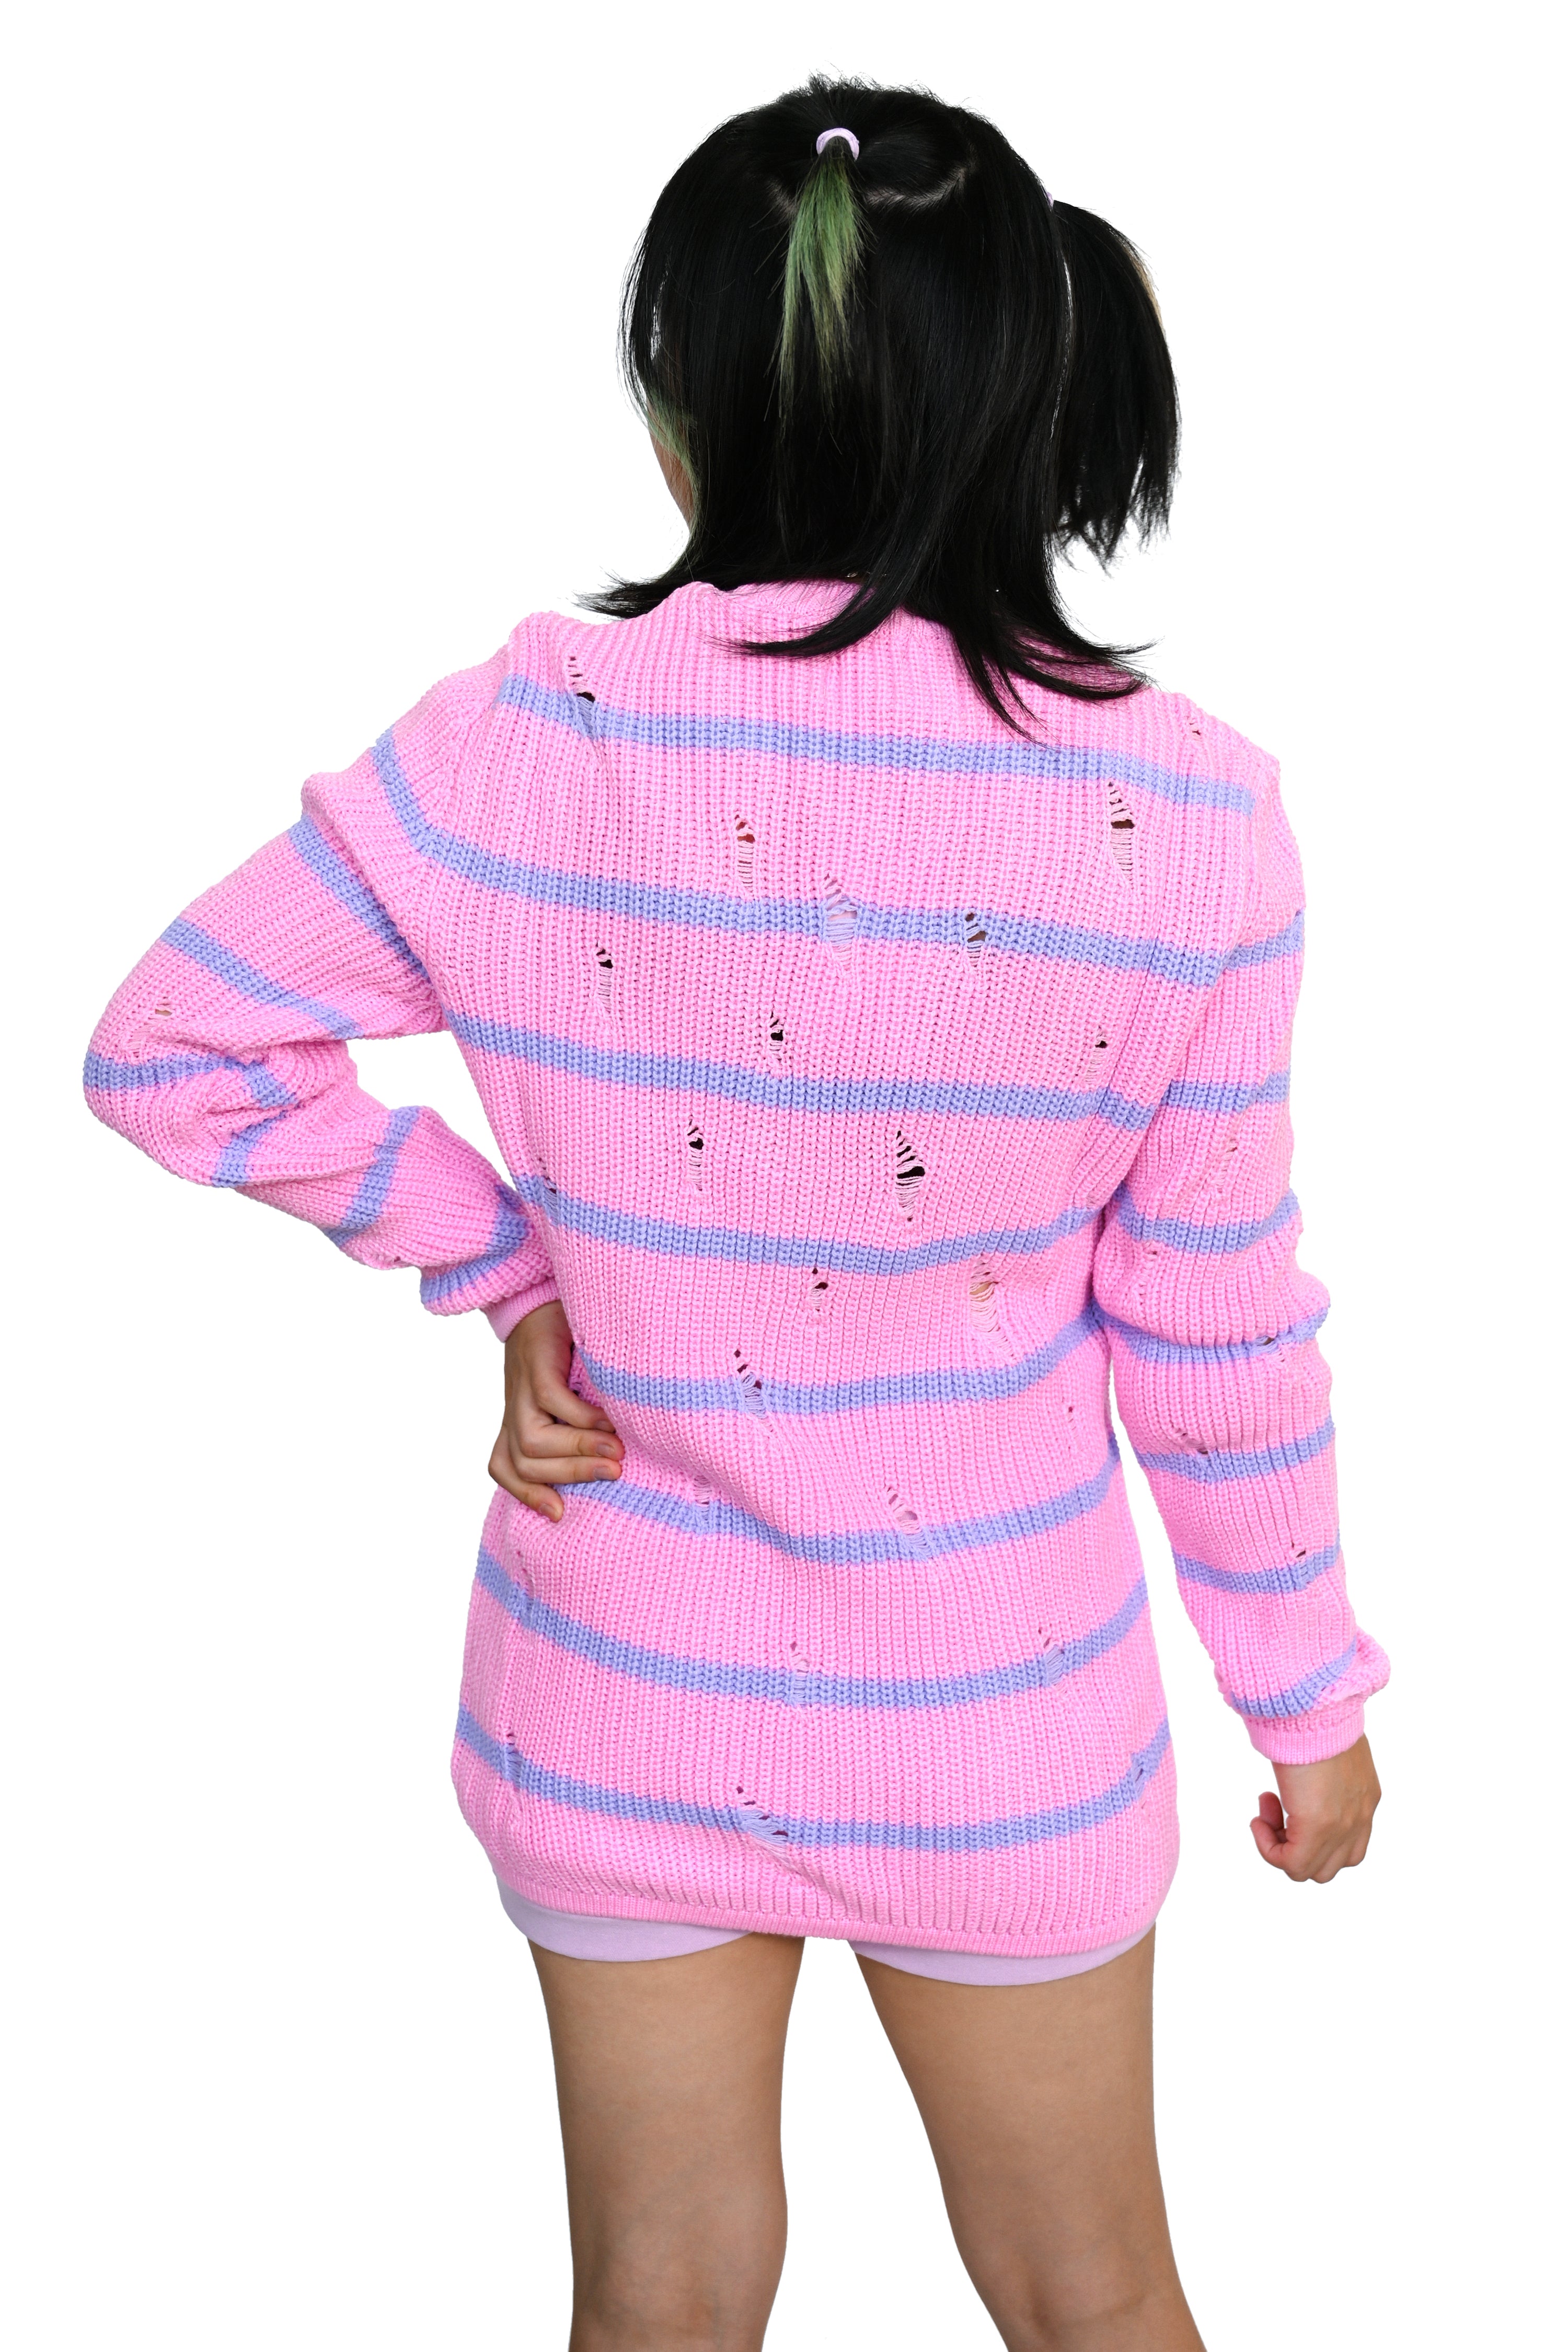 Toxic Shredded Sweater - Pink/Lavender